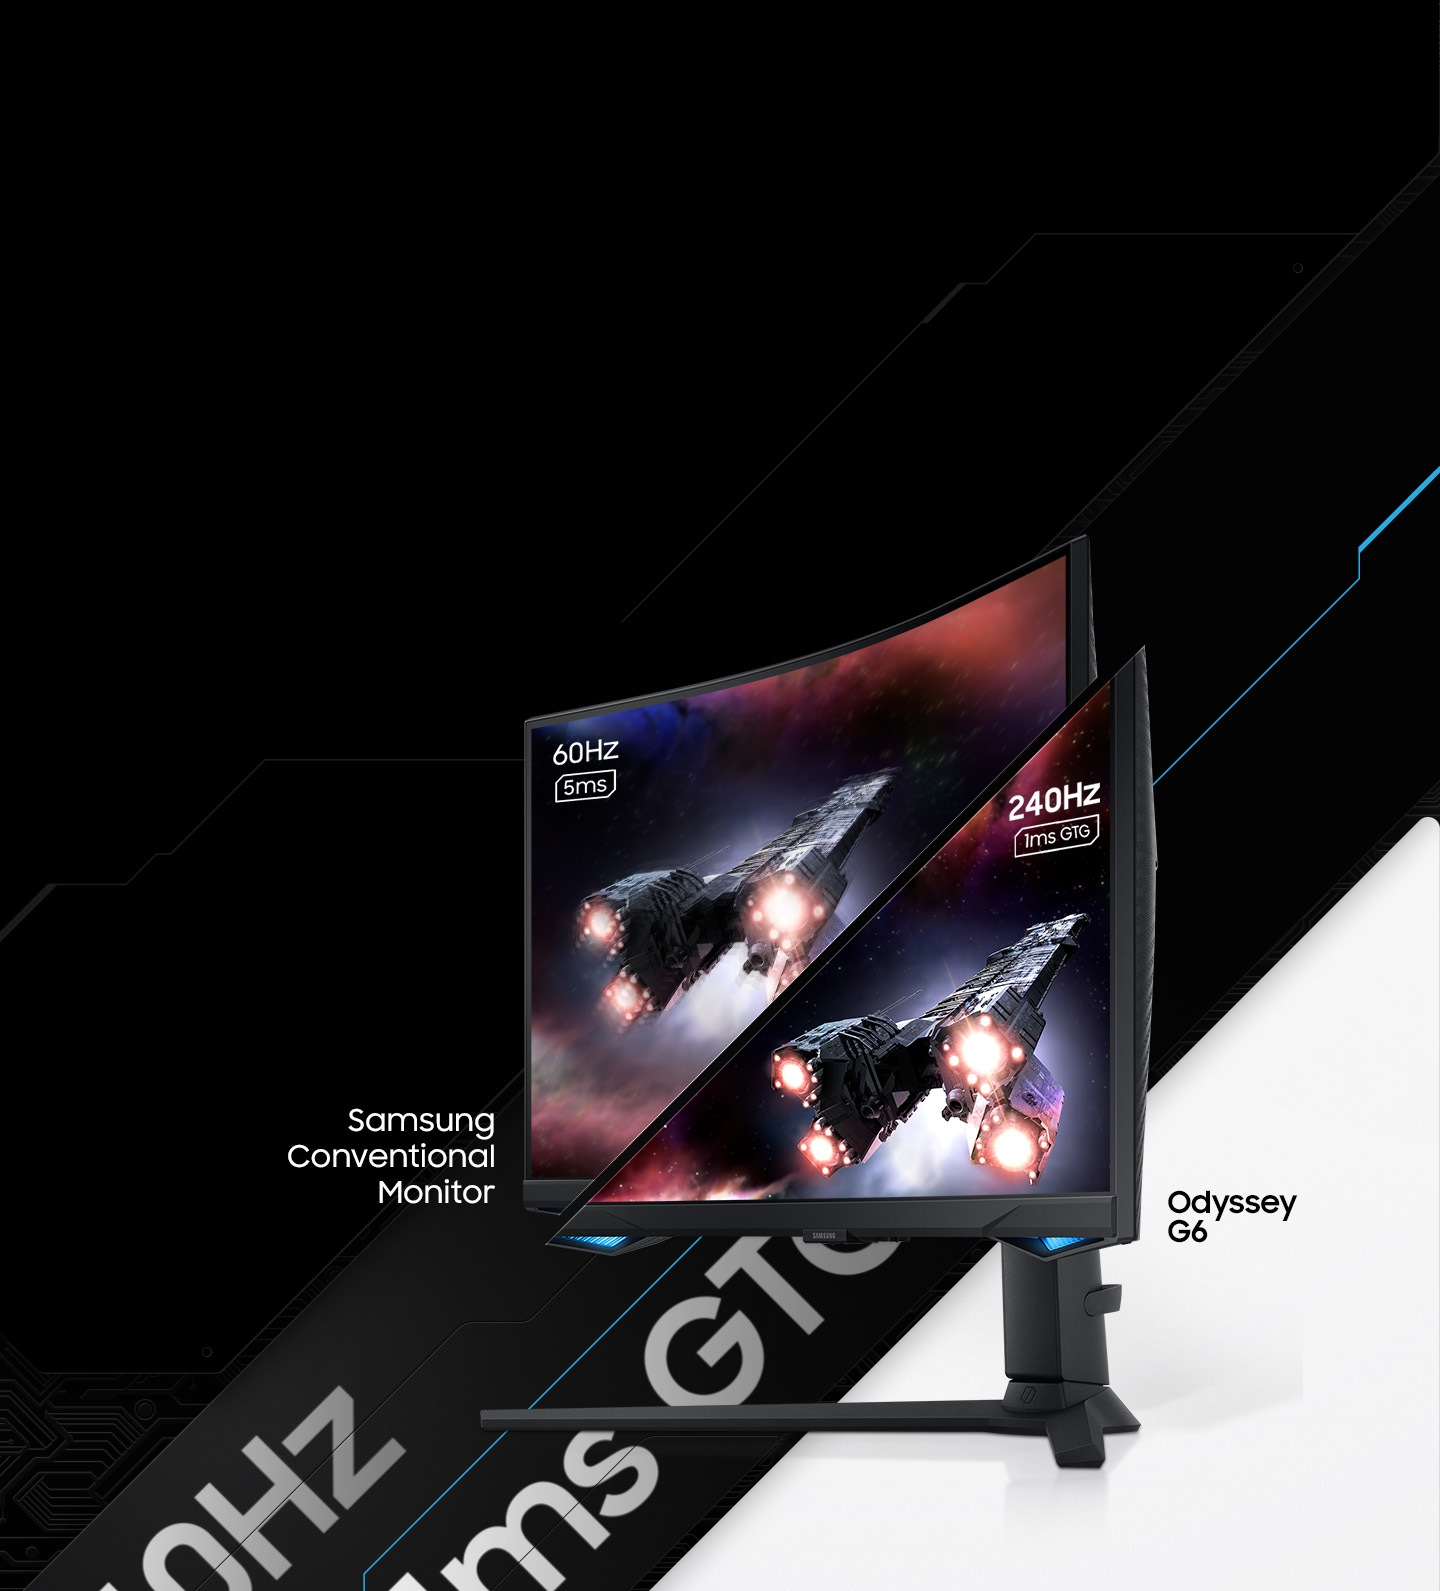 A monitor which is seen from its right side shows two spaceships blasting off into space. The monitor is split in two to show the difference in display quality comparing two different refresh rates and response time, one for conventional monitor with 60Hz and 5ms and the other for Odyssey G6 with 240Hz and 1ms GTG.